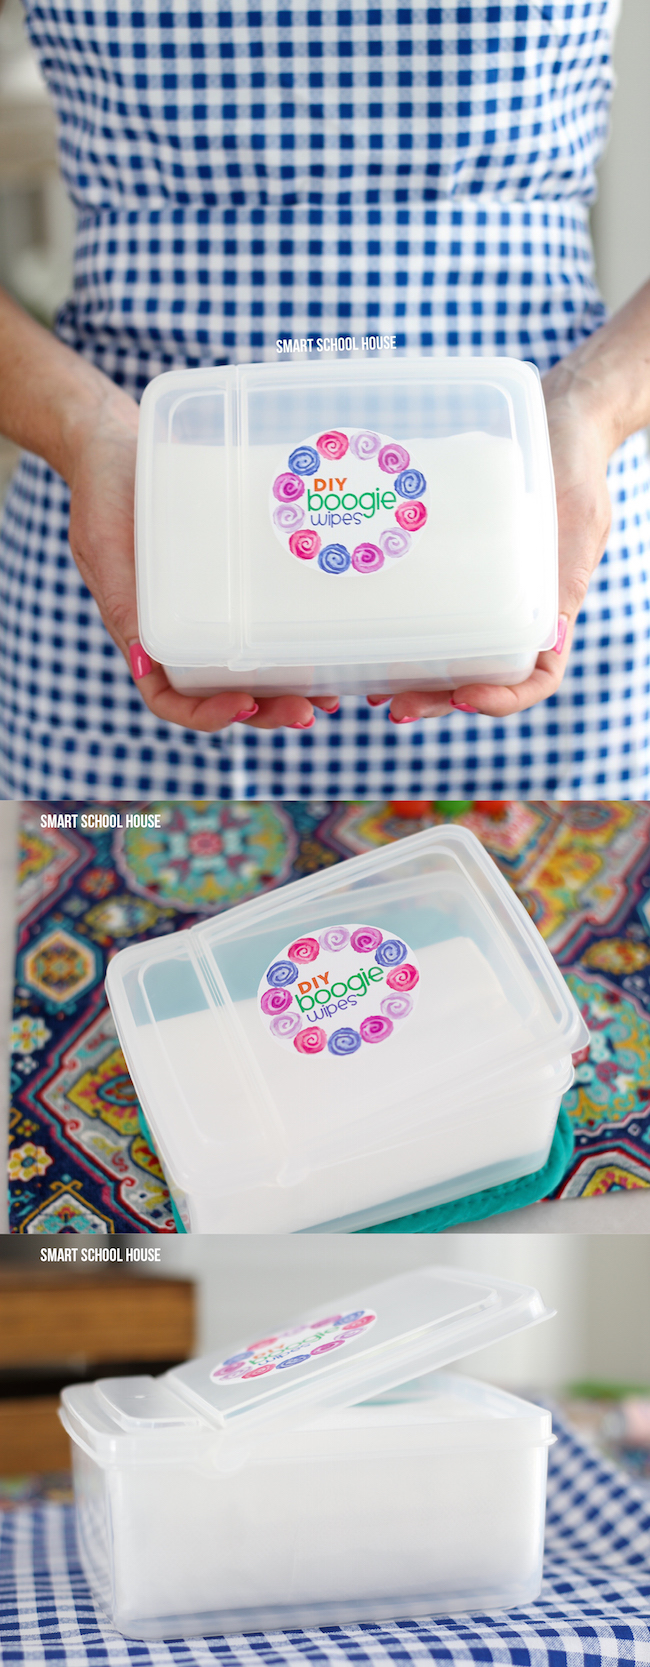 DIY Boogie Wipes - a homemade grape smelling solution to soothe your runny nose when you have a cold 